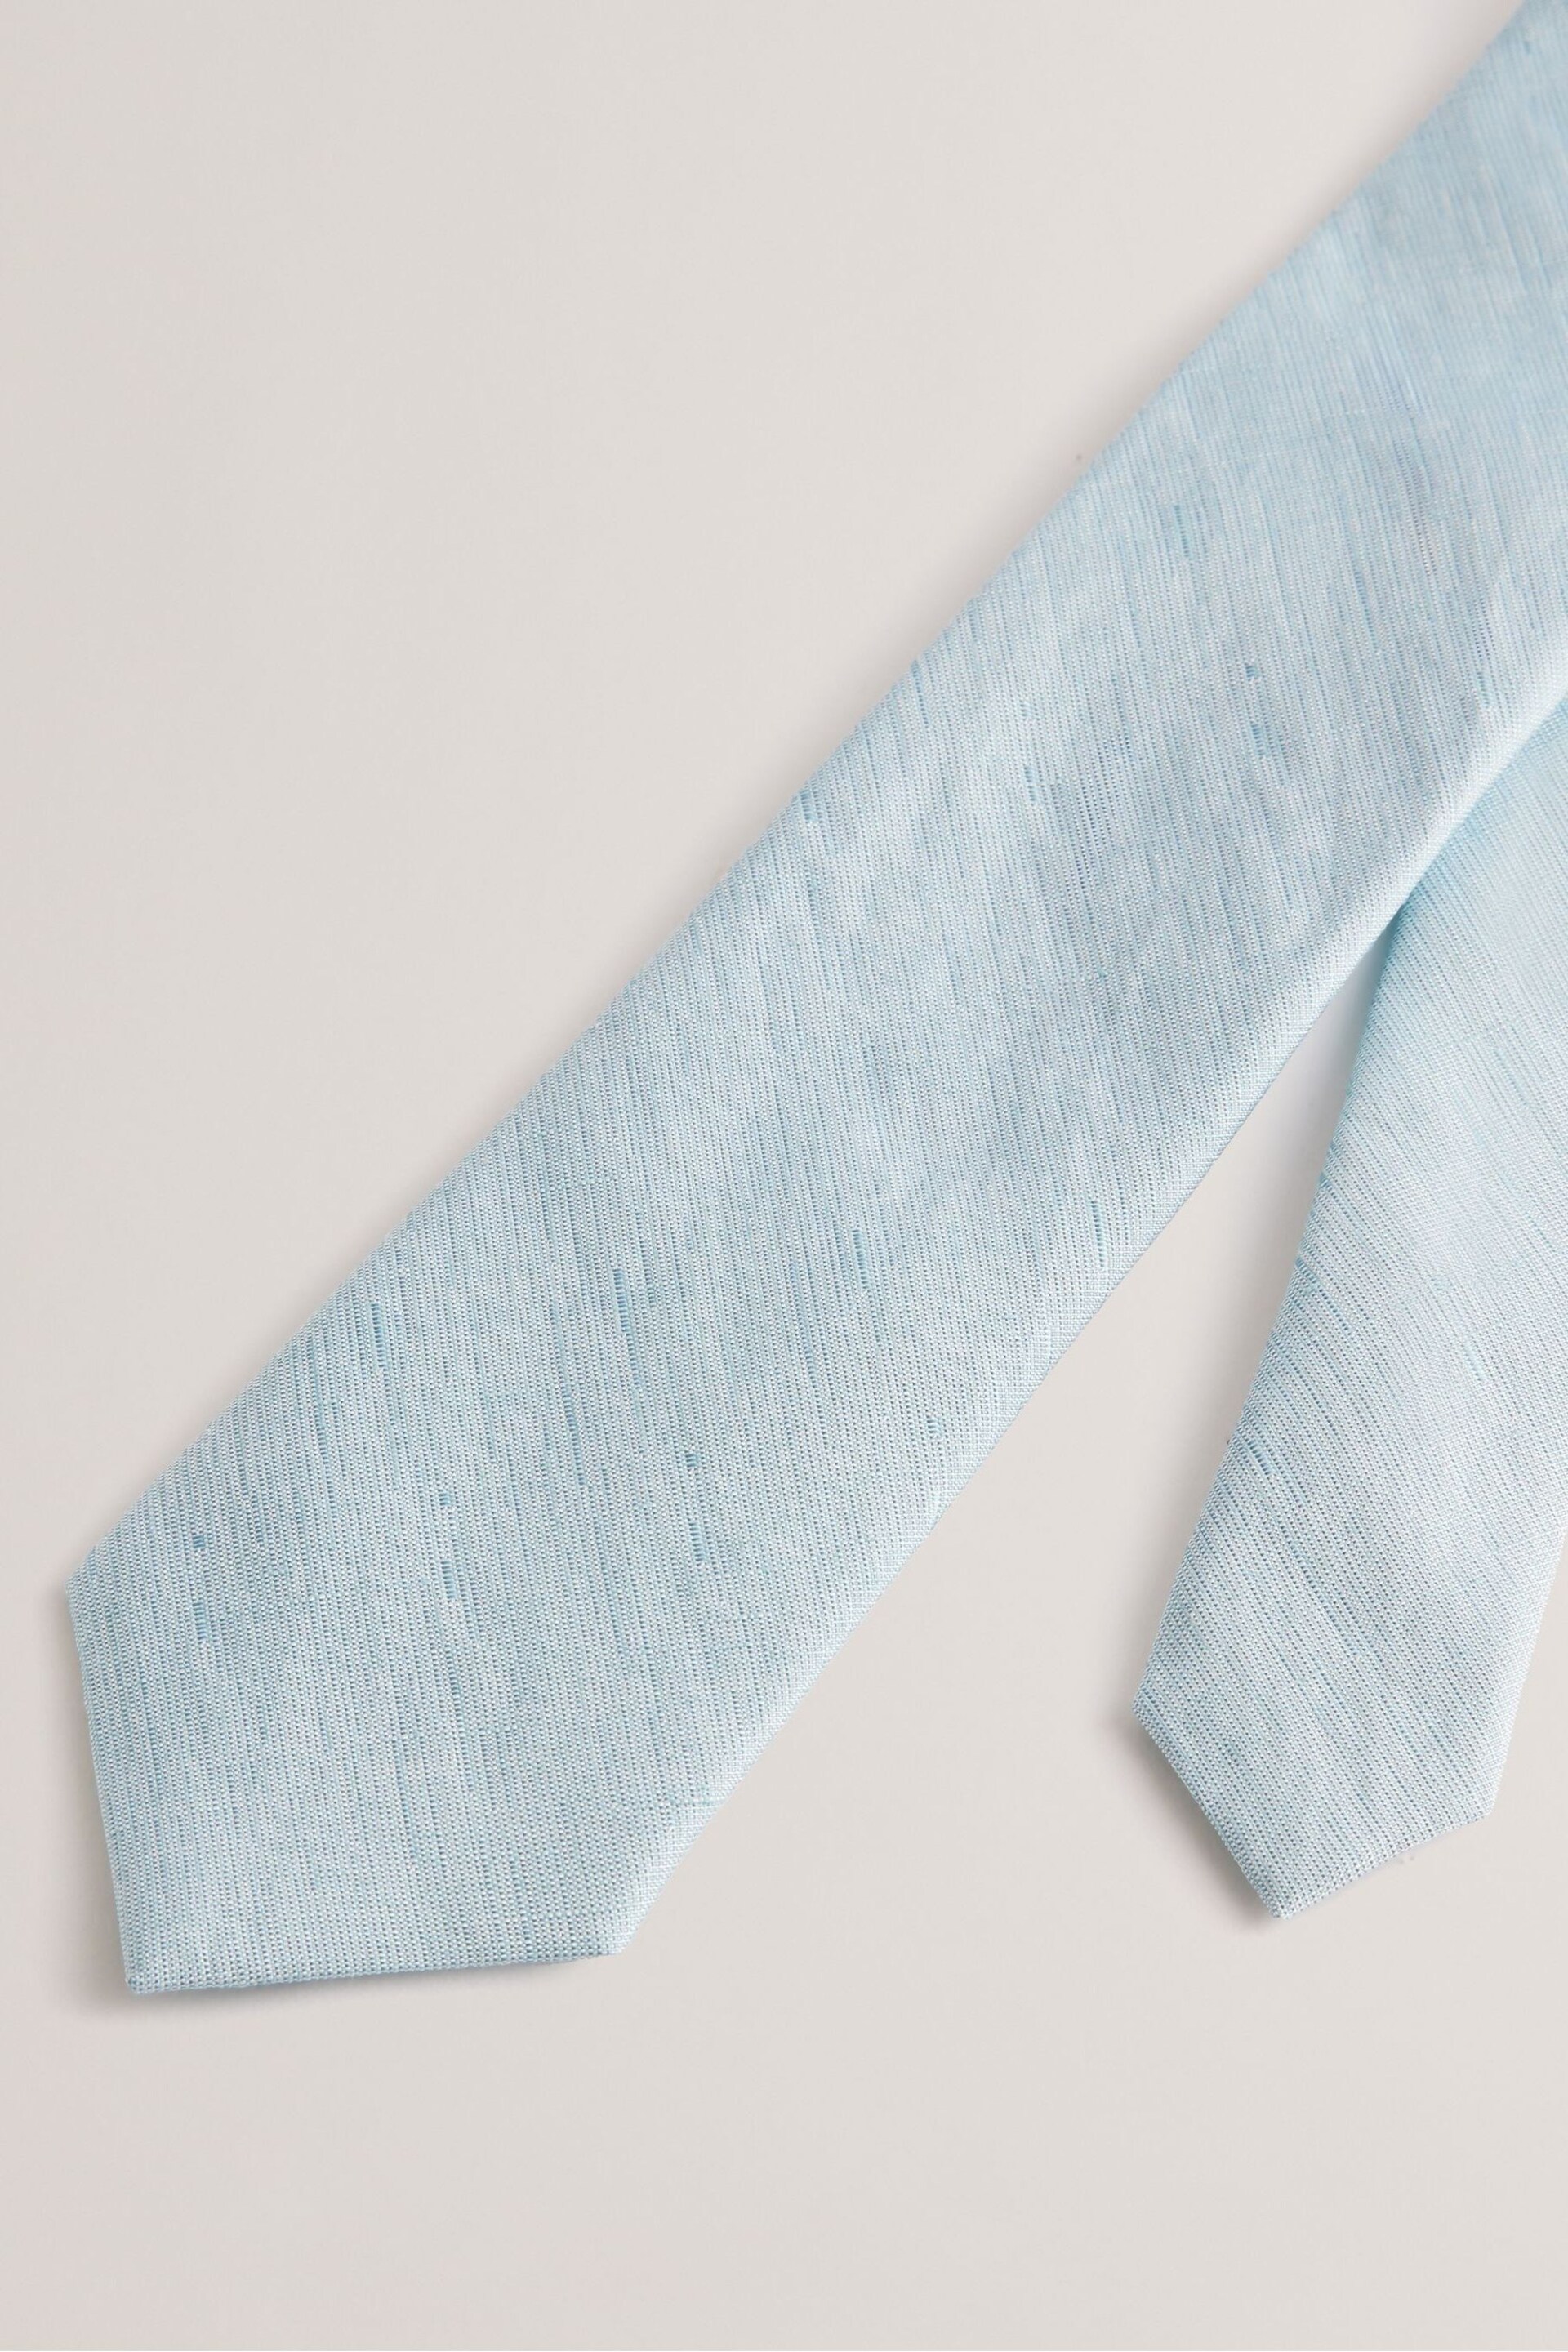 Ted Baker Blue Lyre Texture Silk Linen Tie - Image 2 of 4